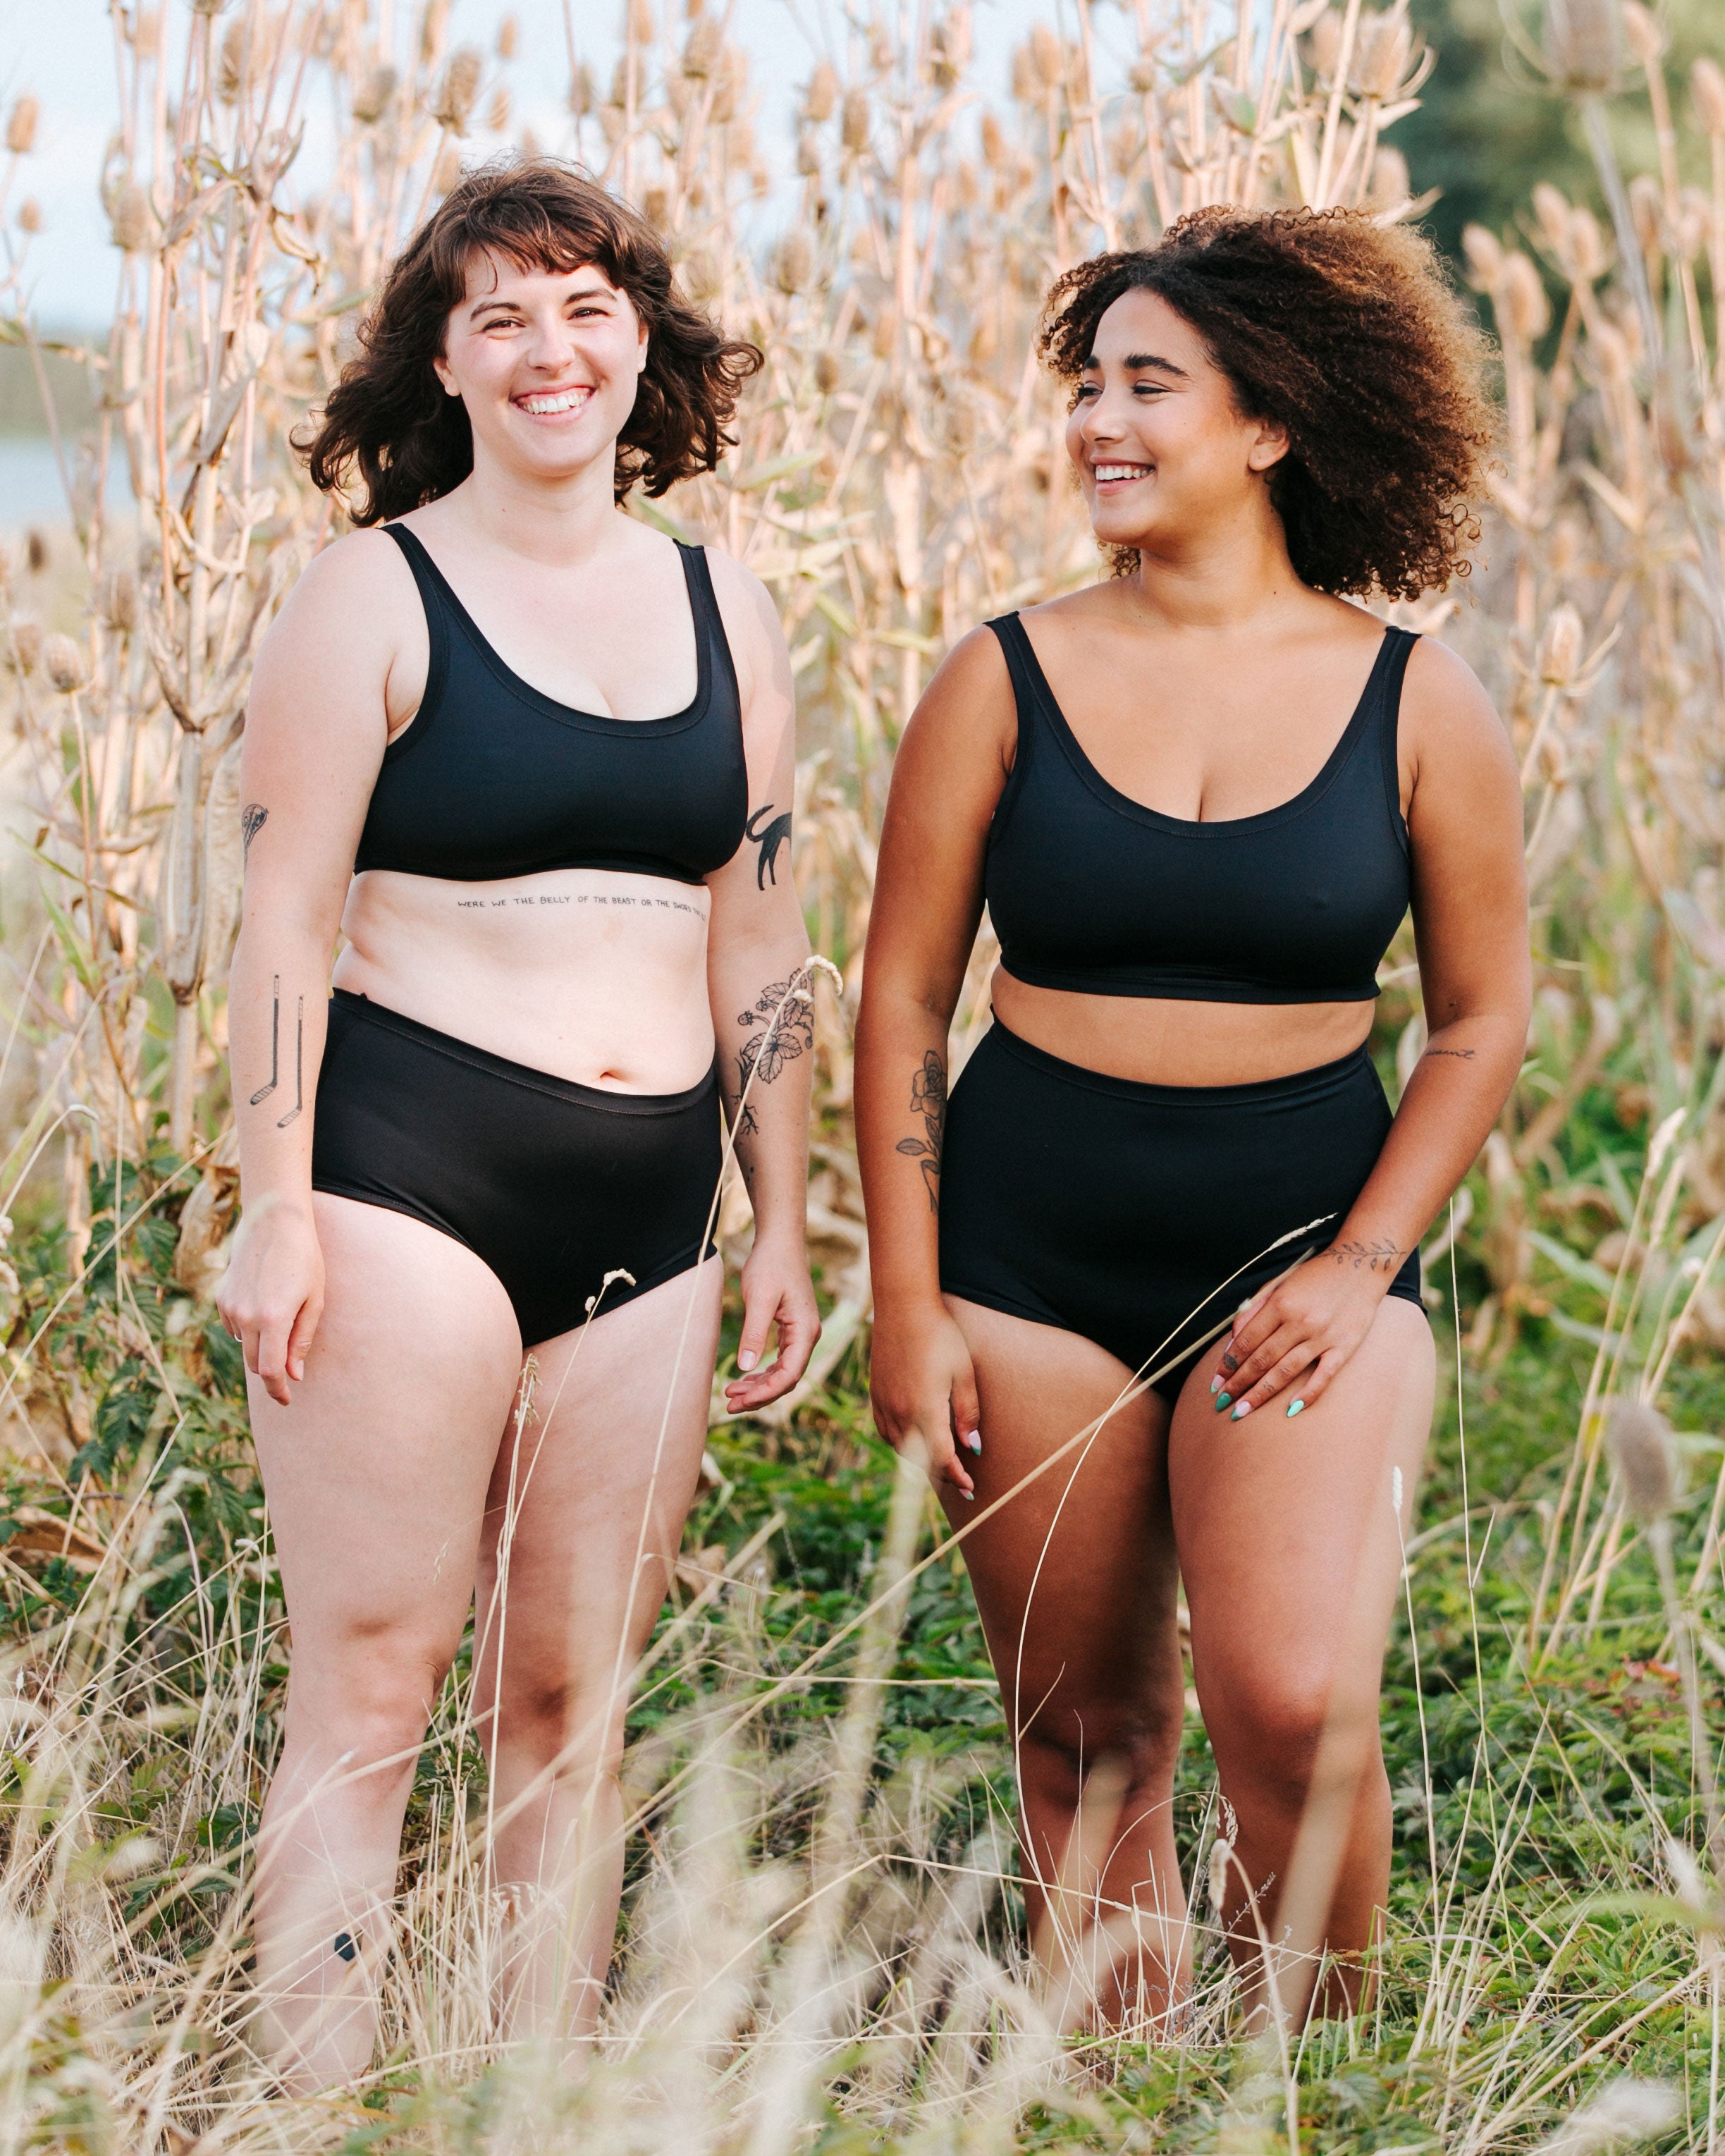 Two models laughing together on the beach wearing Thunderpants recycled nylon Swimwear Tops and Swimwear Original style and Sky rise style bottoms in Plain Black.